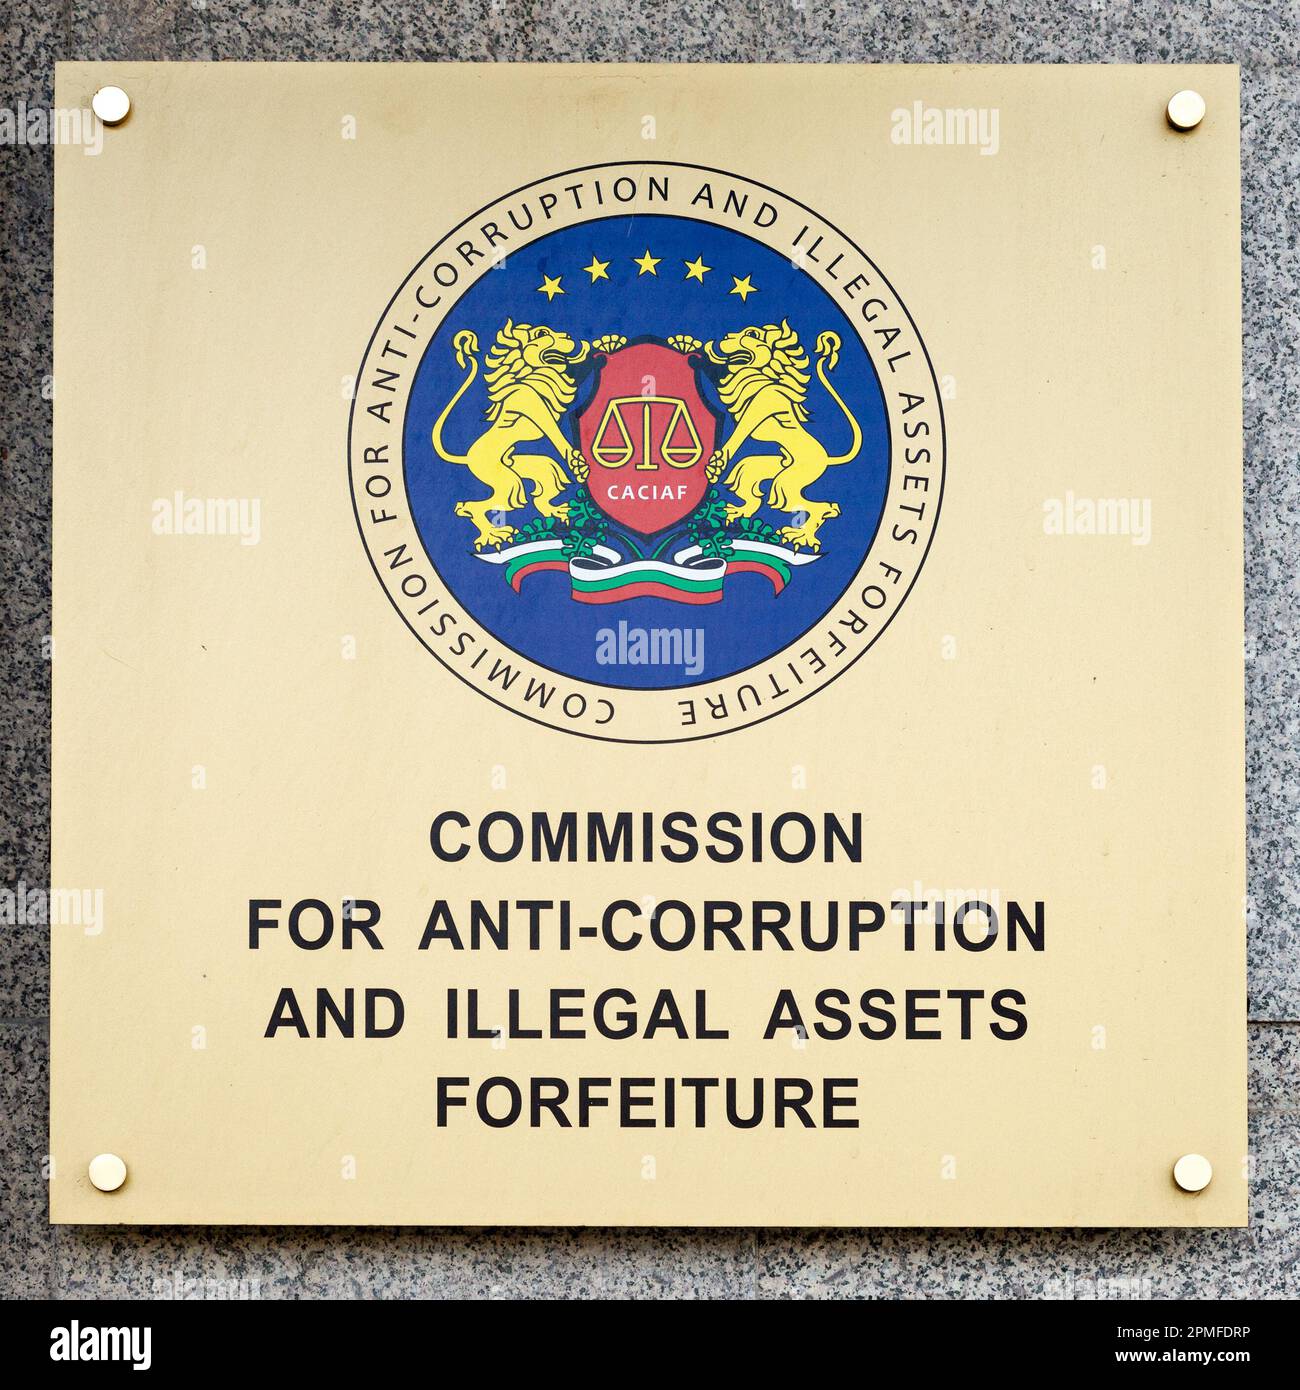 Sign and logo for the Commission for Anti-Corruption and Illegal Assets Forfeiture or CACIAF in Sofia, Bulgaria, Eastern Europe, Balkans, EU Stock Photo